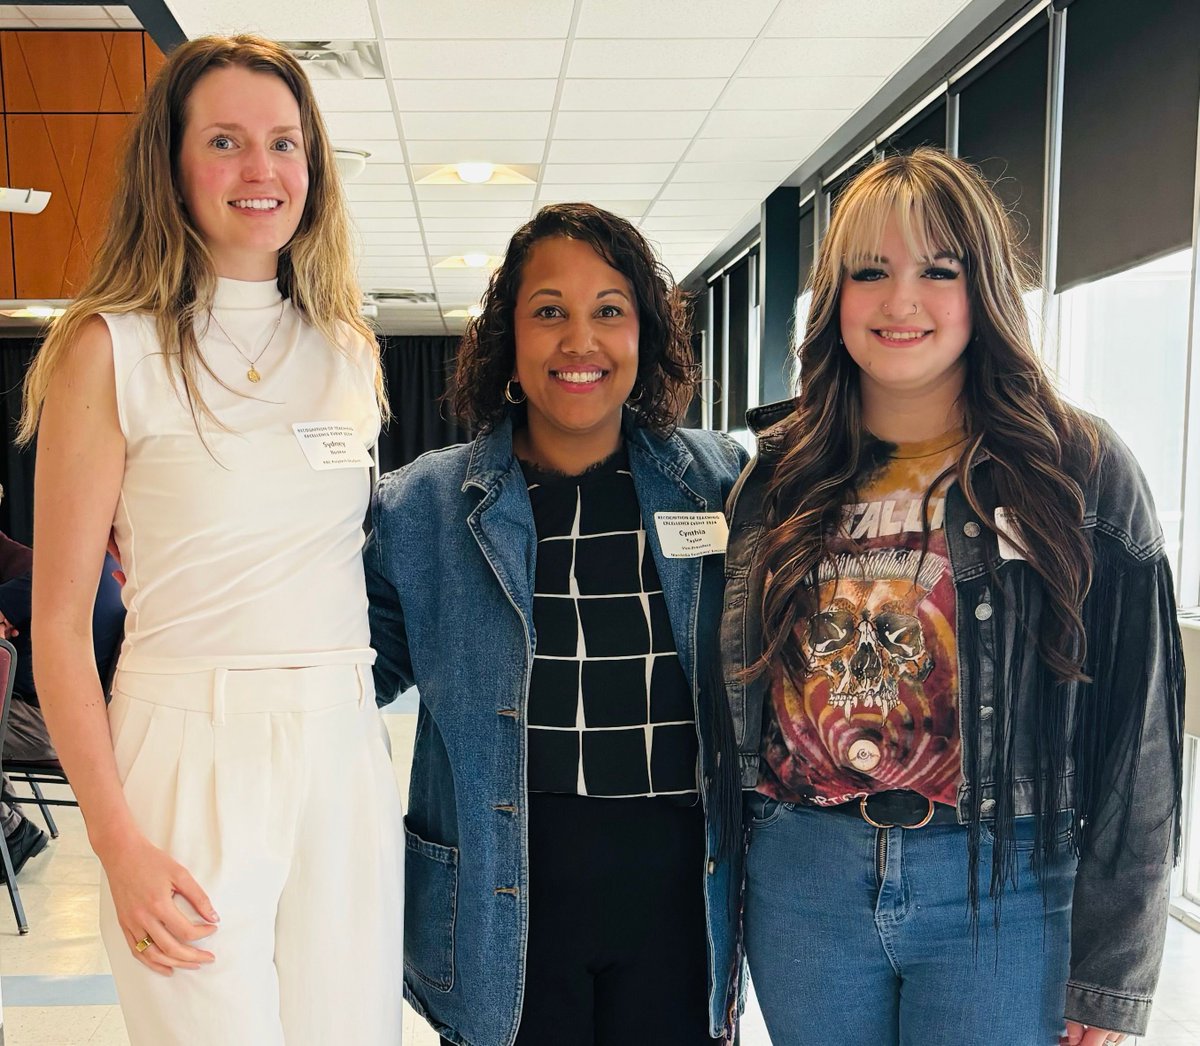 MTS VP Cynthia Taylor was proud to present bursaries to @RRC Polytech students, yesterday. Sydney Booker (L) received the Society's General Bursary for $3,000. Jennifer Brass (R) received the Society's Indigenous Bursary of $3,000. Congratulations!